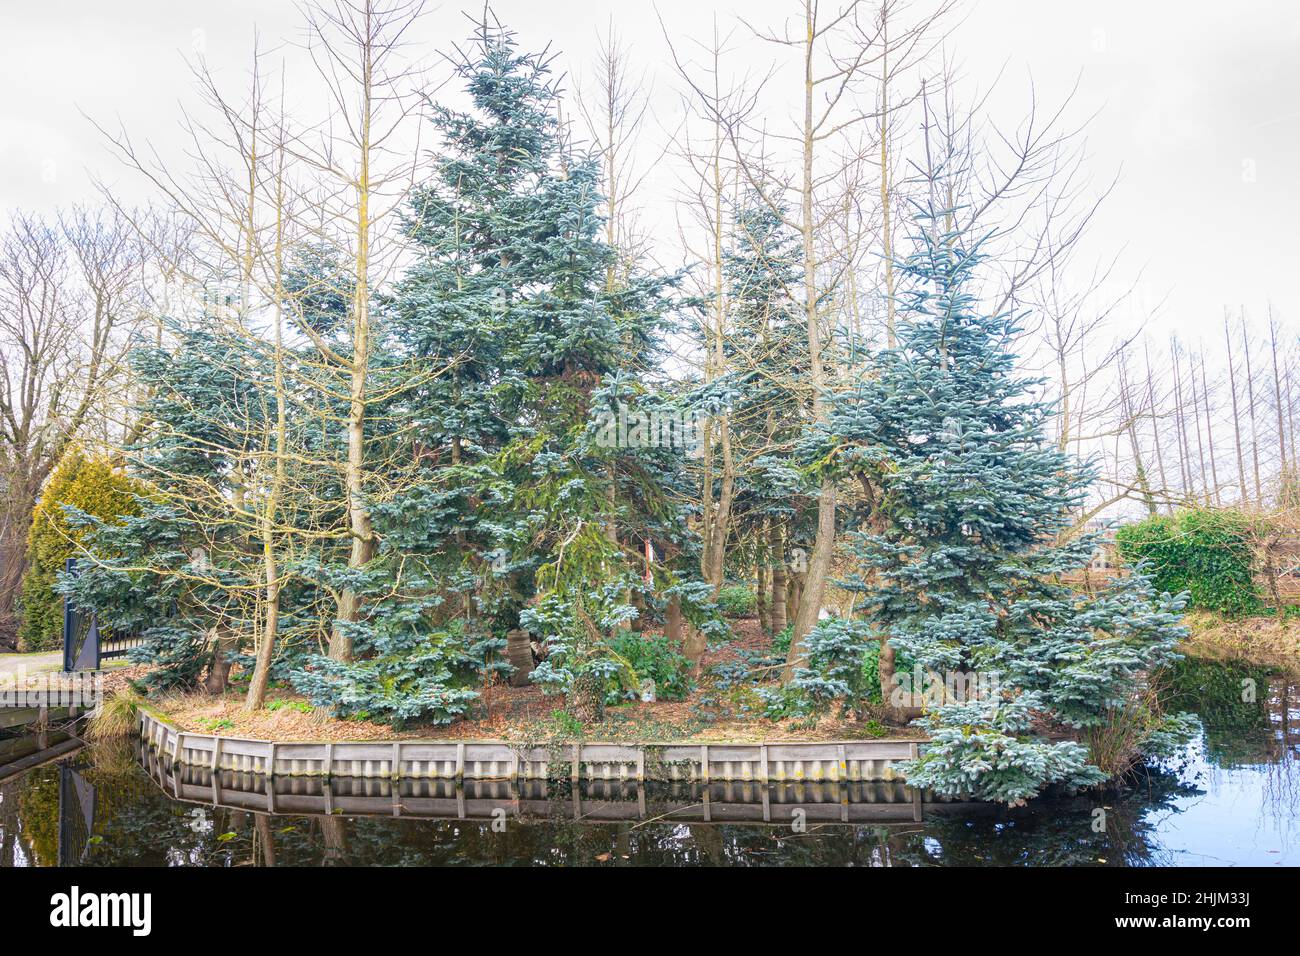 Blue silver firs (Abies procera glauca or blue noble fir) at a tree nursery in Boskoop, Netherlands. The shoots  are used to make grafts. Stock Photo